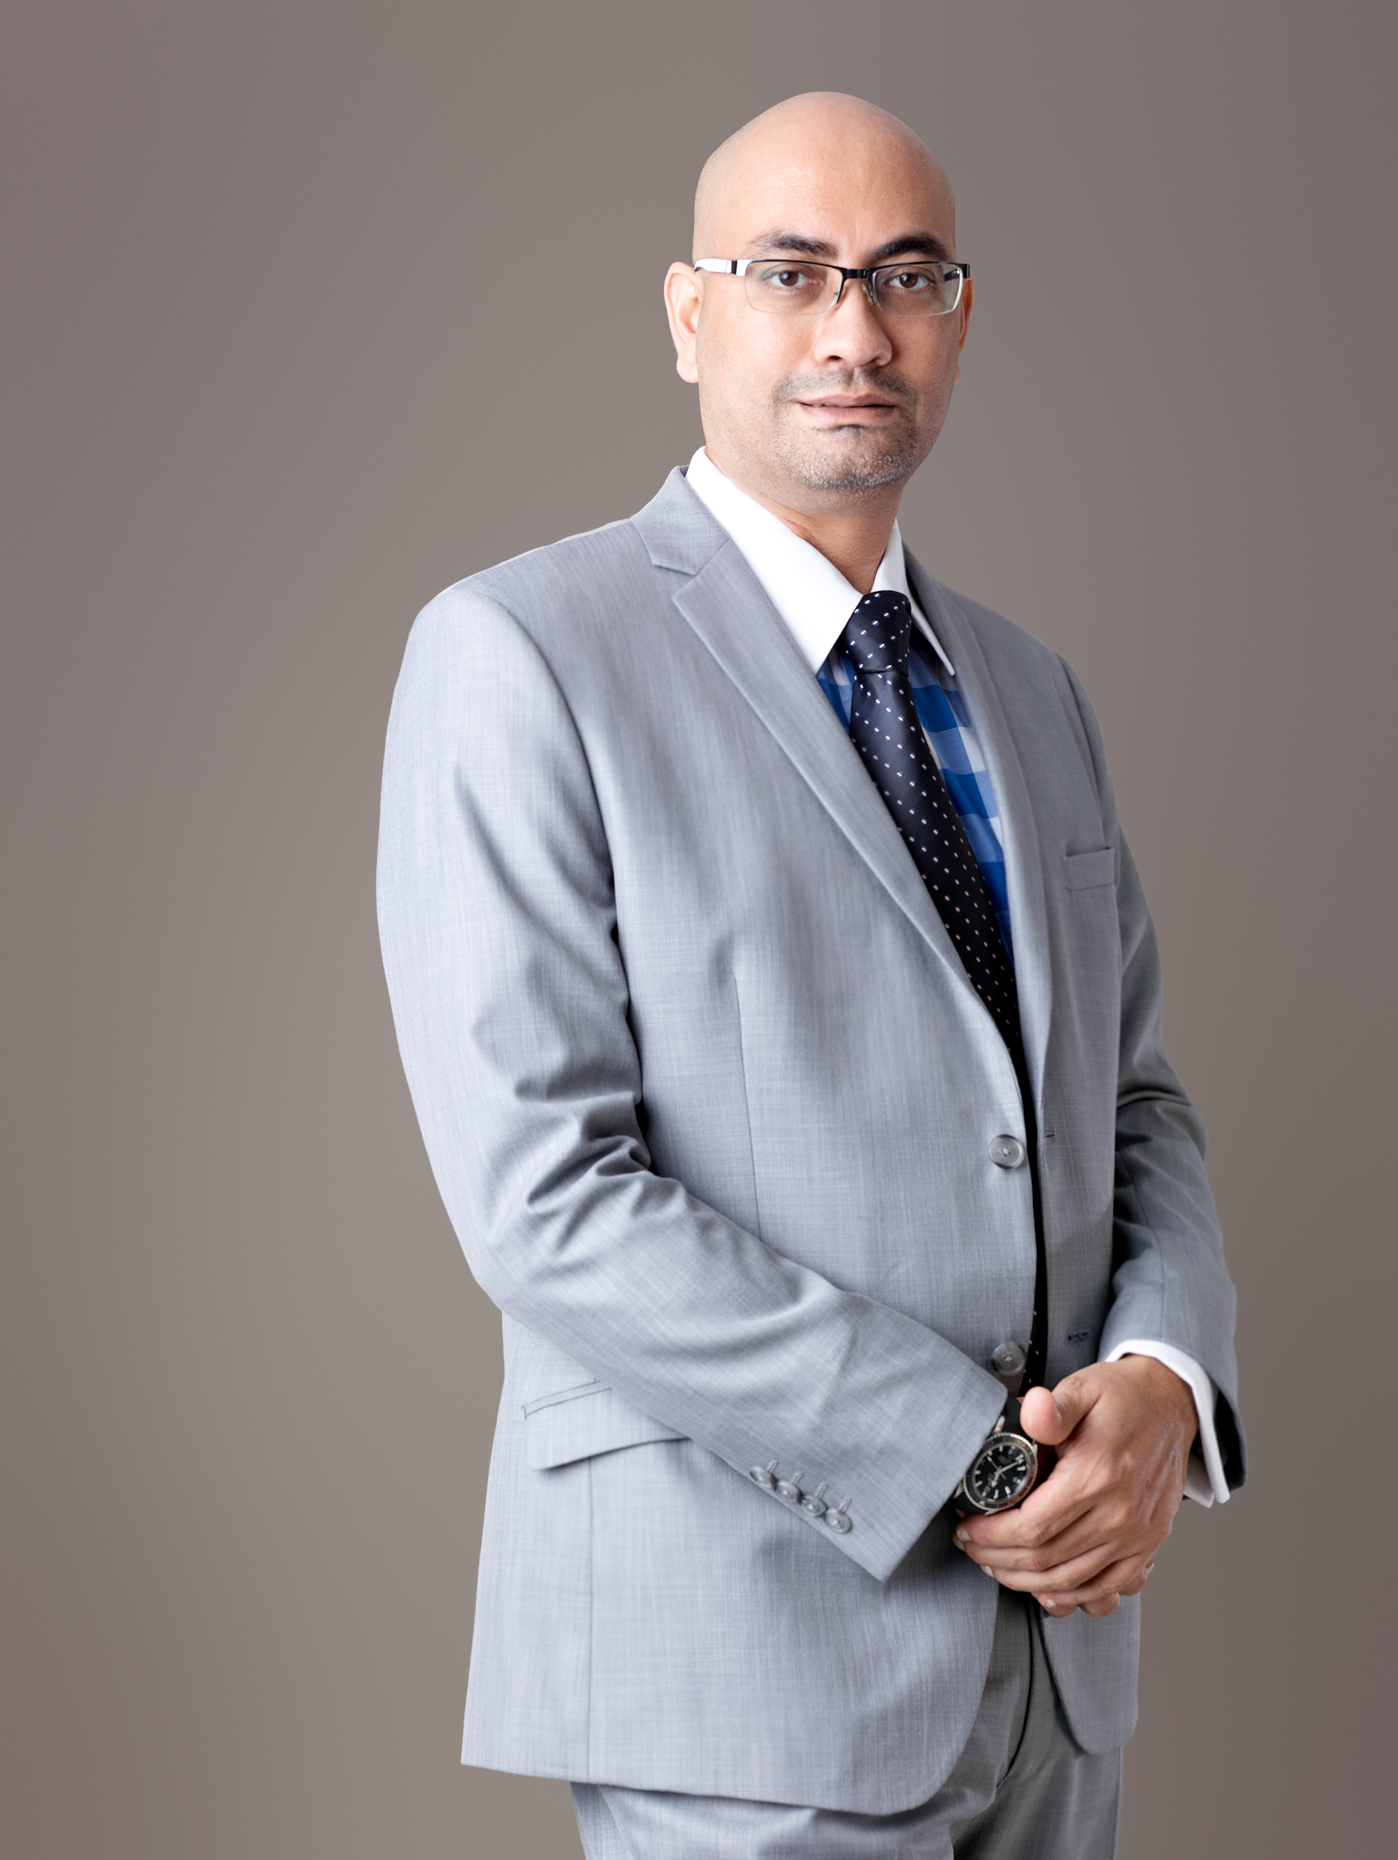 A corporate image of  vice president Liri Holdings for an International Magazine By Arindom Chowdhury